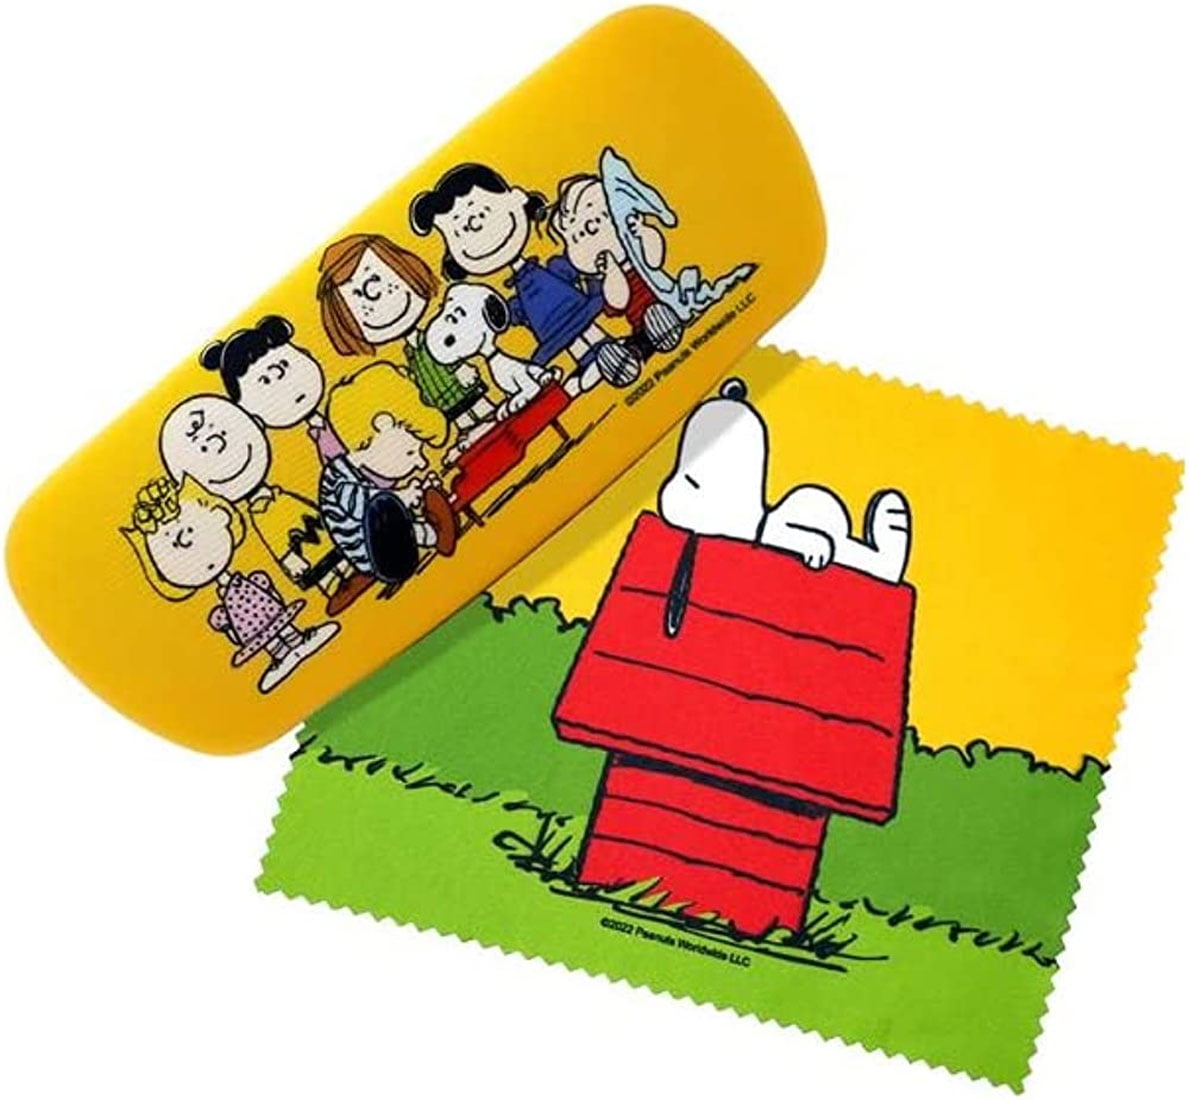 Peanuts Gang Eyeglass Case with Snoopy Cleaning Cloth - Walmart.com